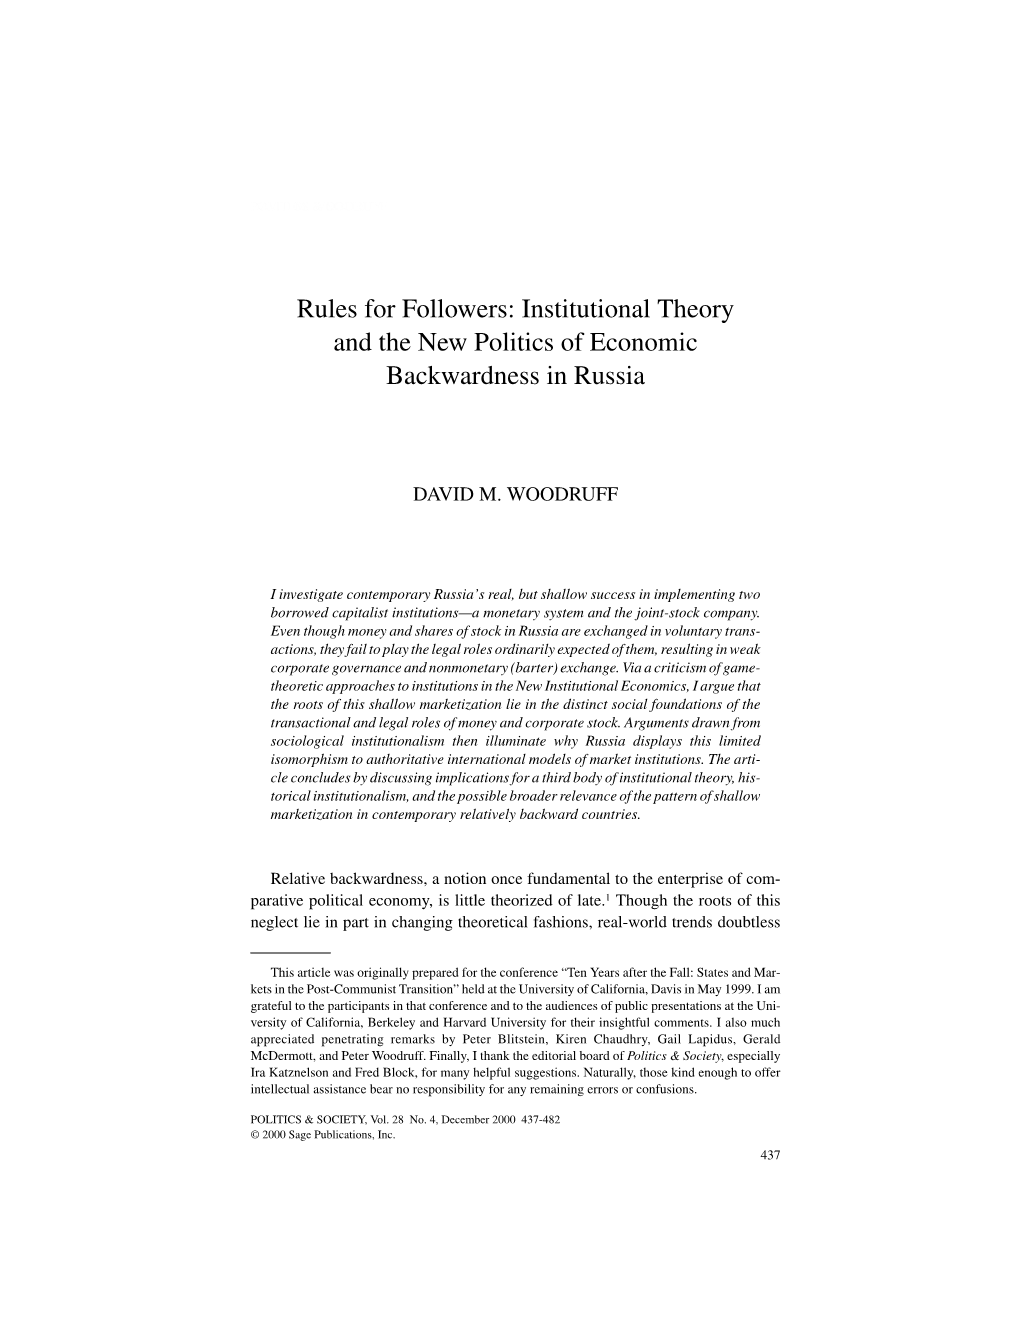 Rules for Followers: Institutional Theory and the New Politics of Economic Backwardness in Russia